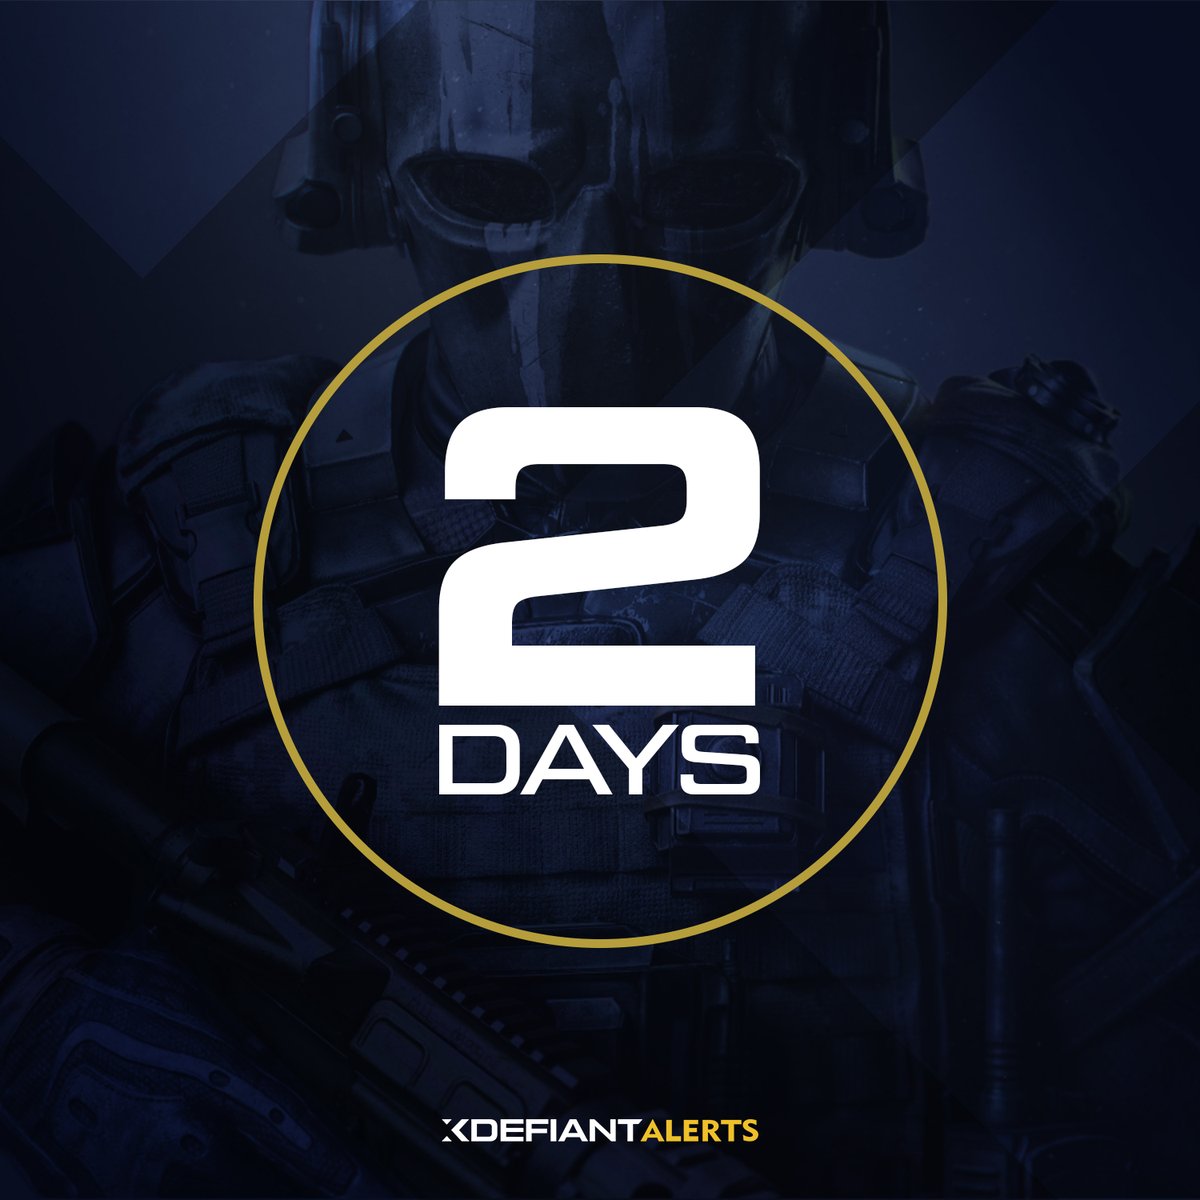 Only 2 days left until XDefiant launches worldwide.